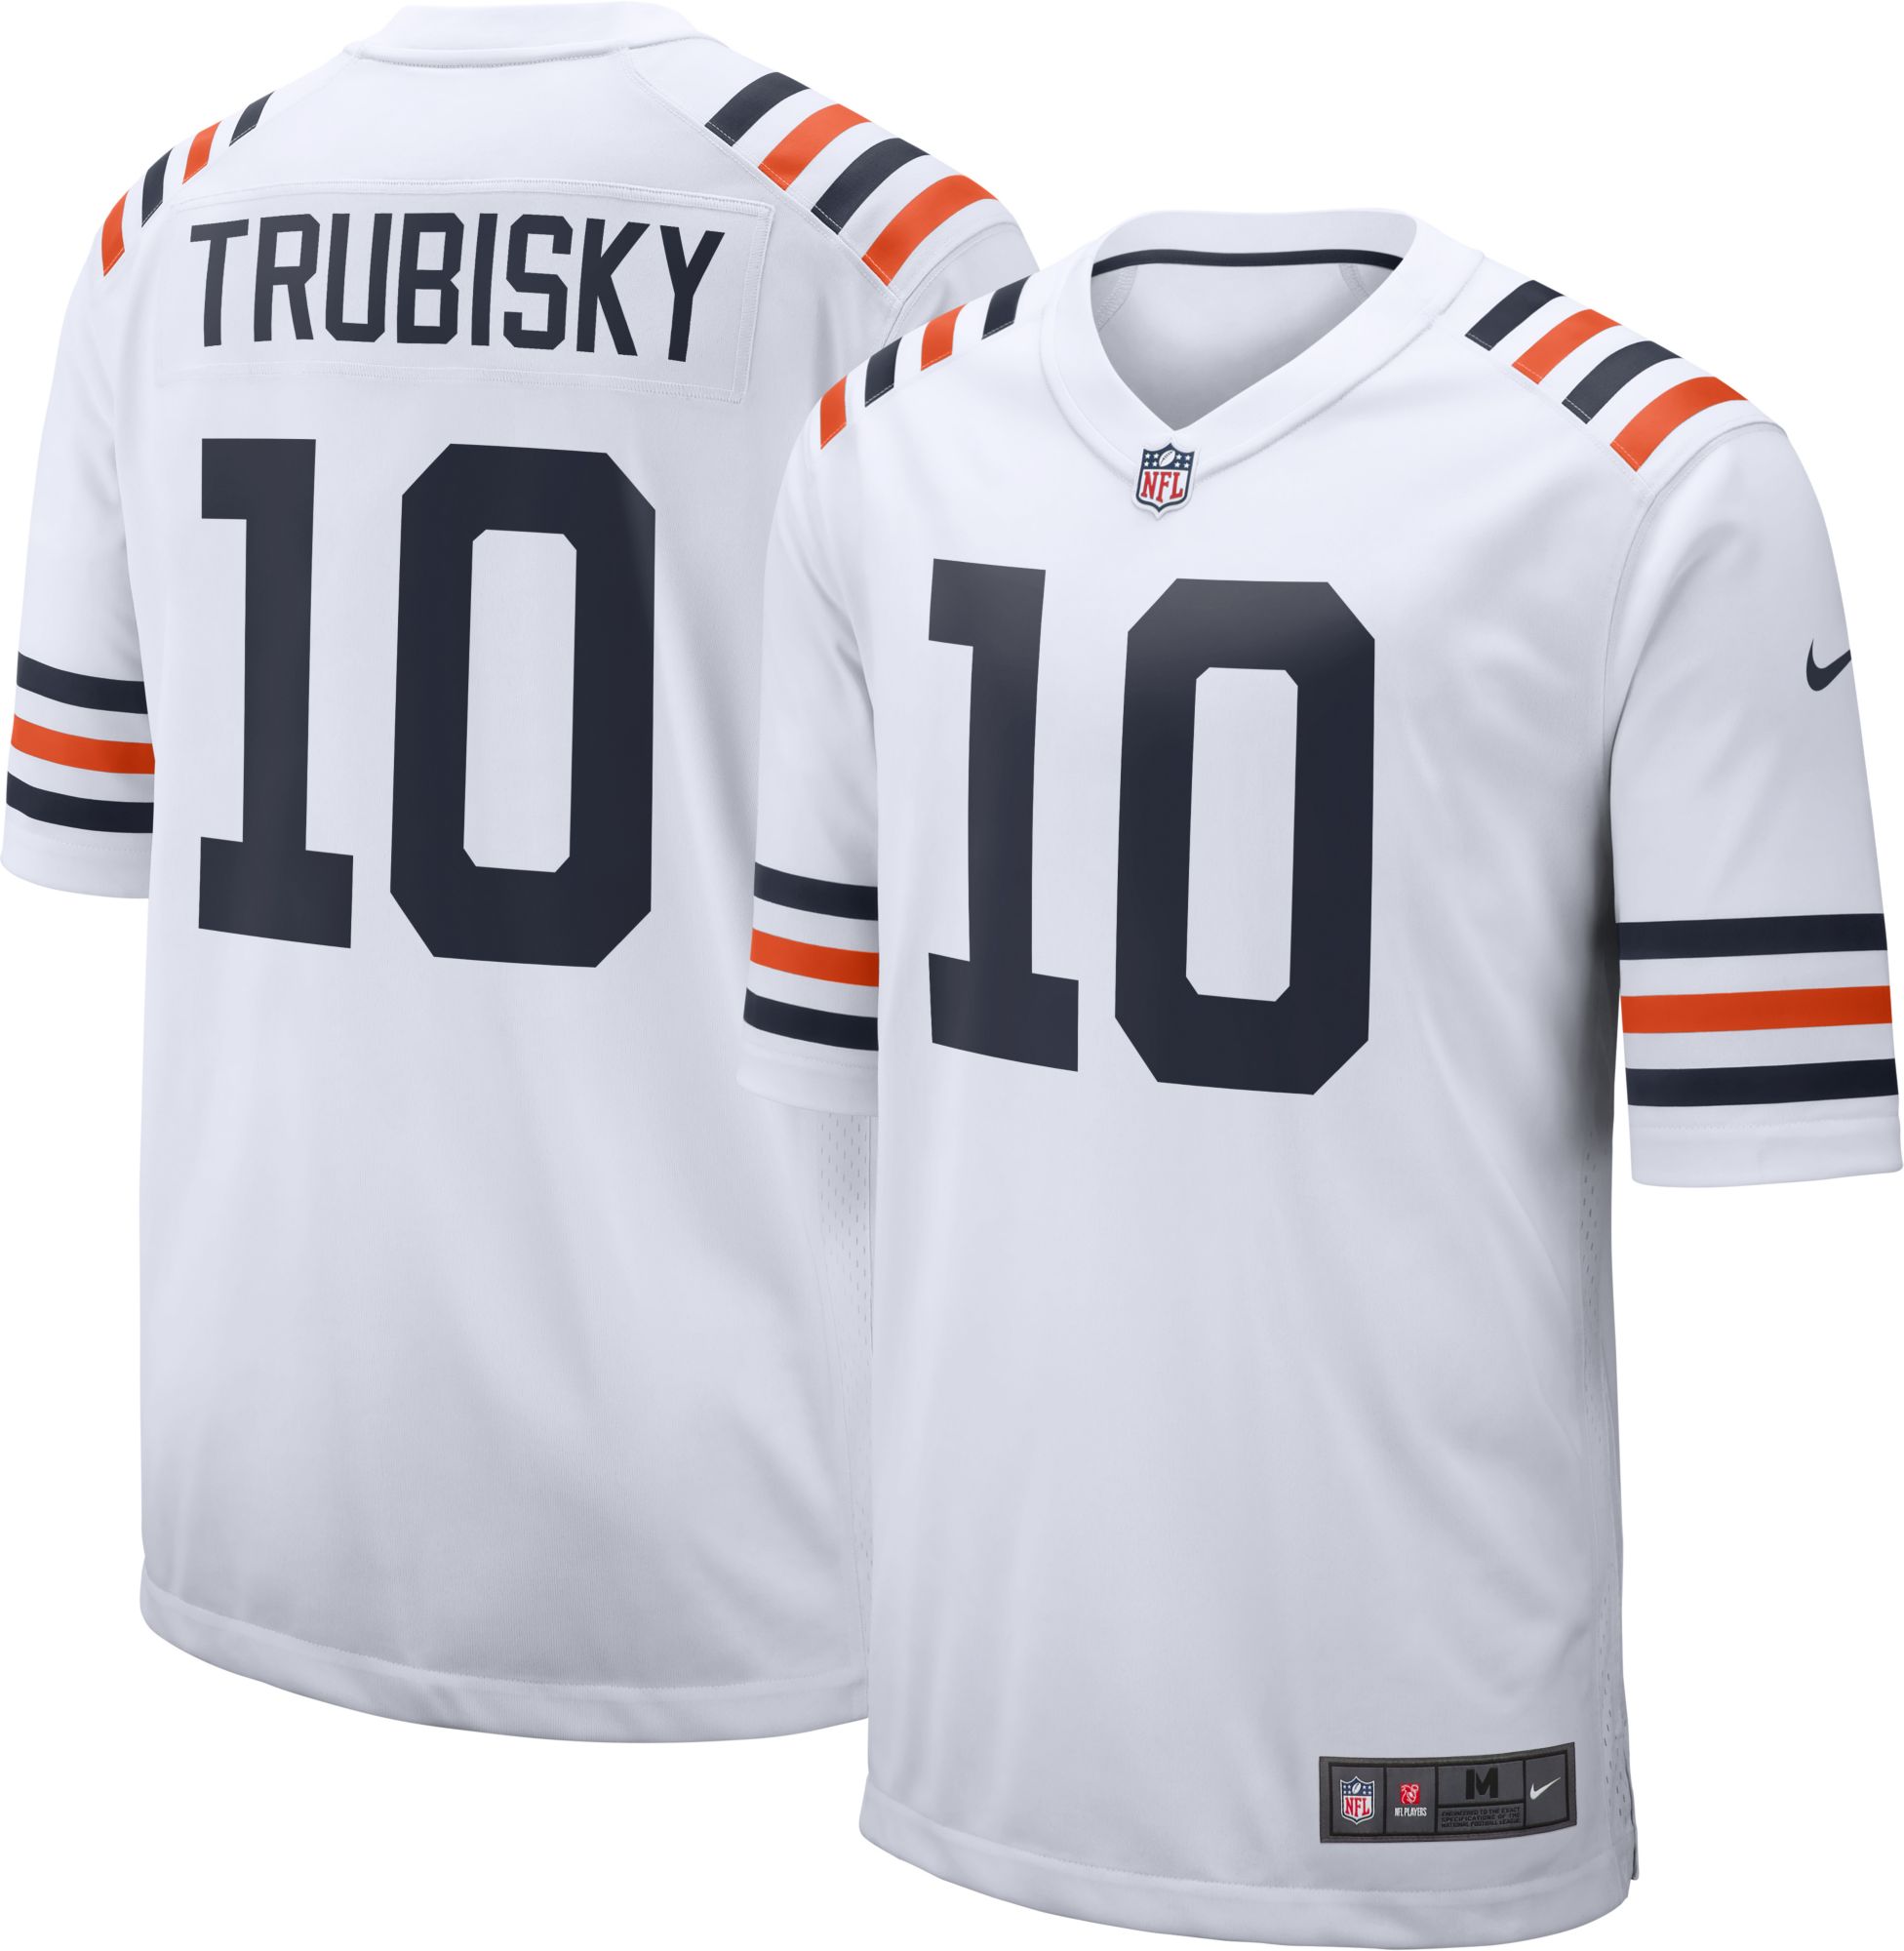 chicago bears 10 jersey